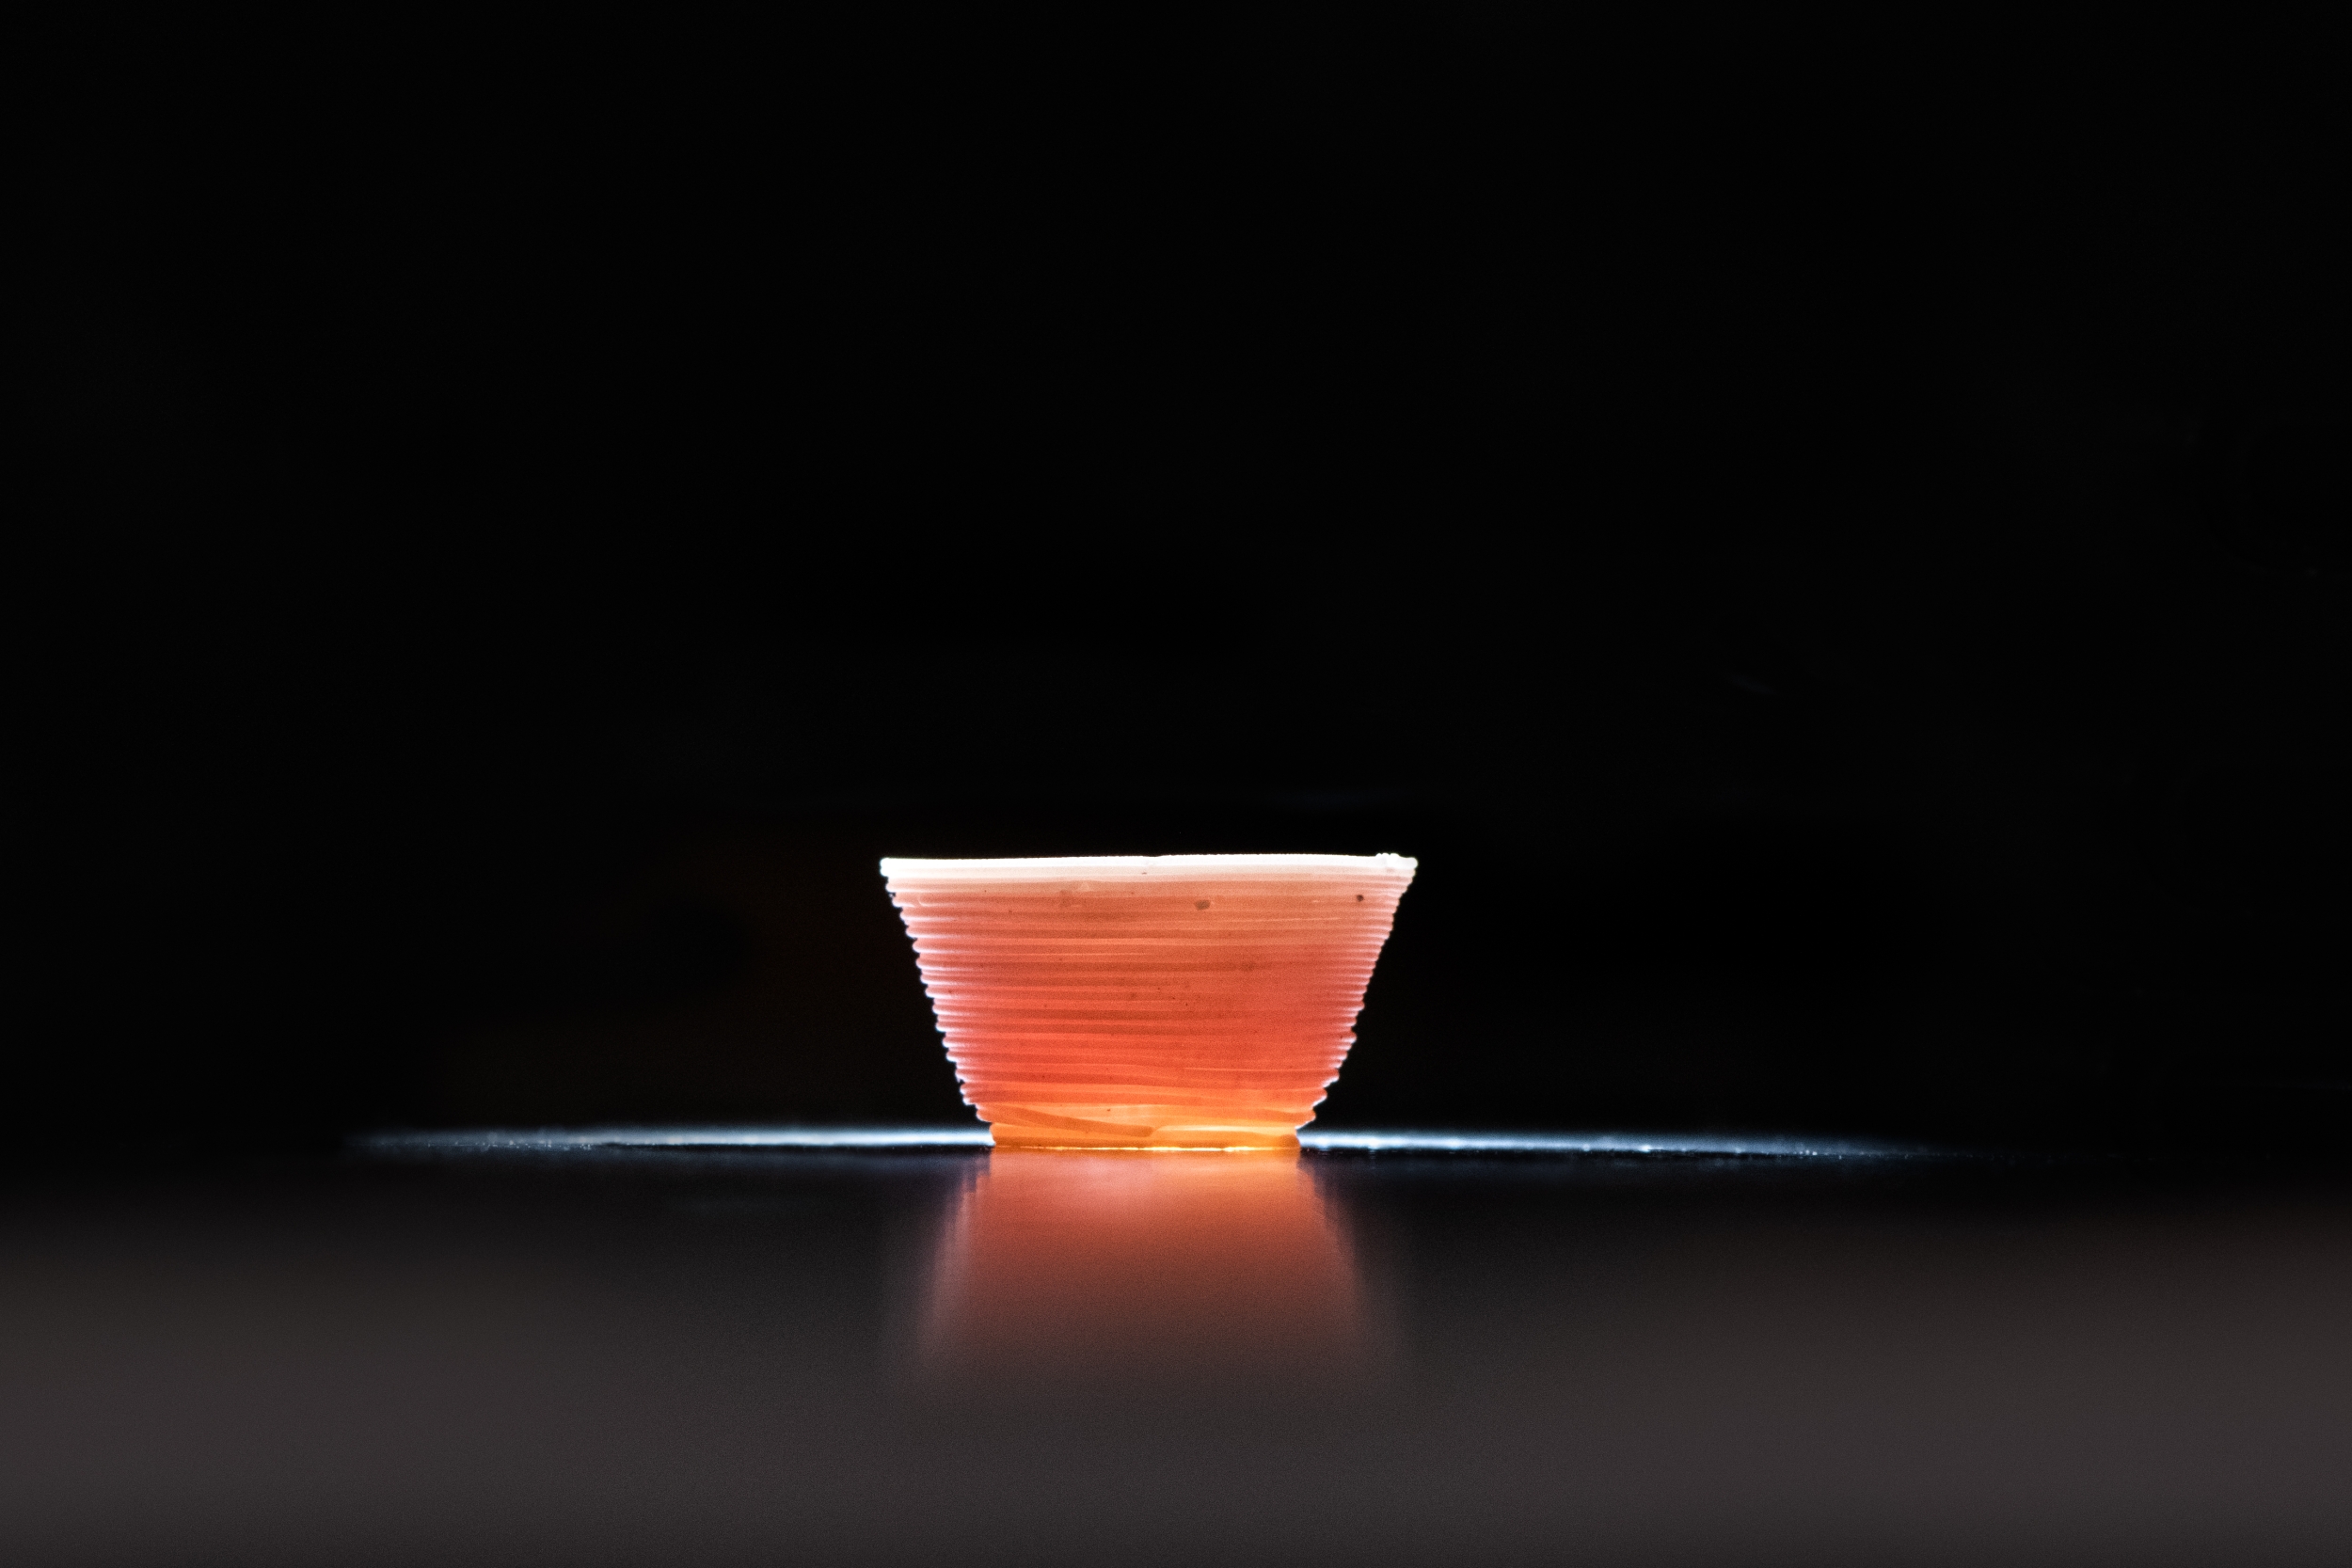 A small cup, made out of 3D printed glass, is lit from within, making the cup glow orange.